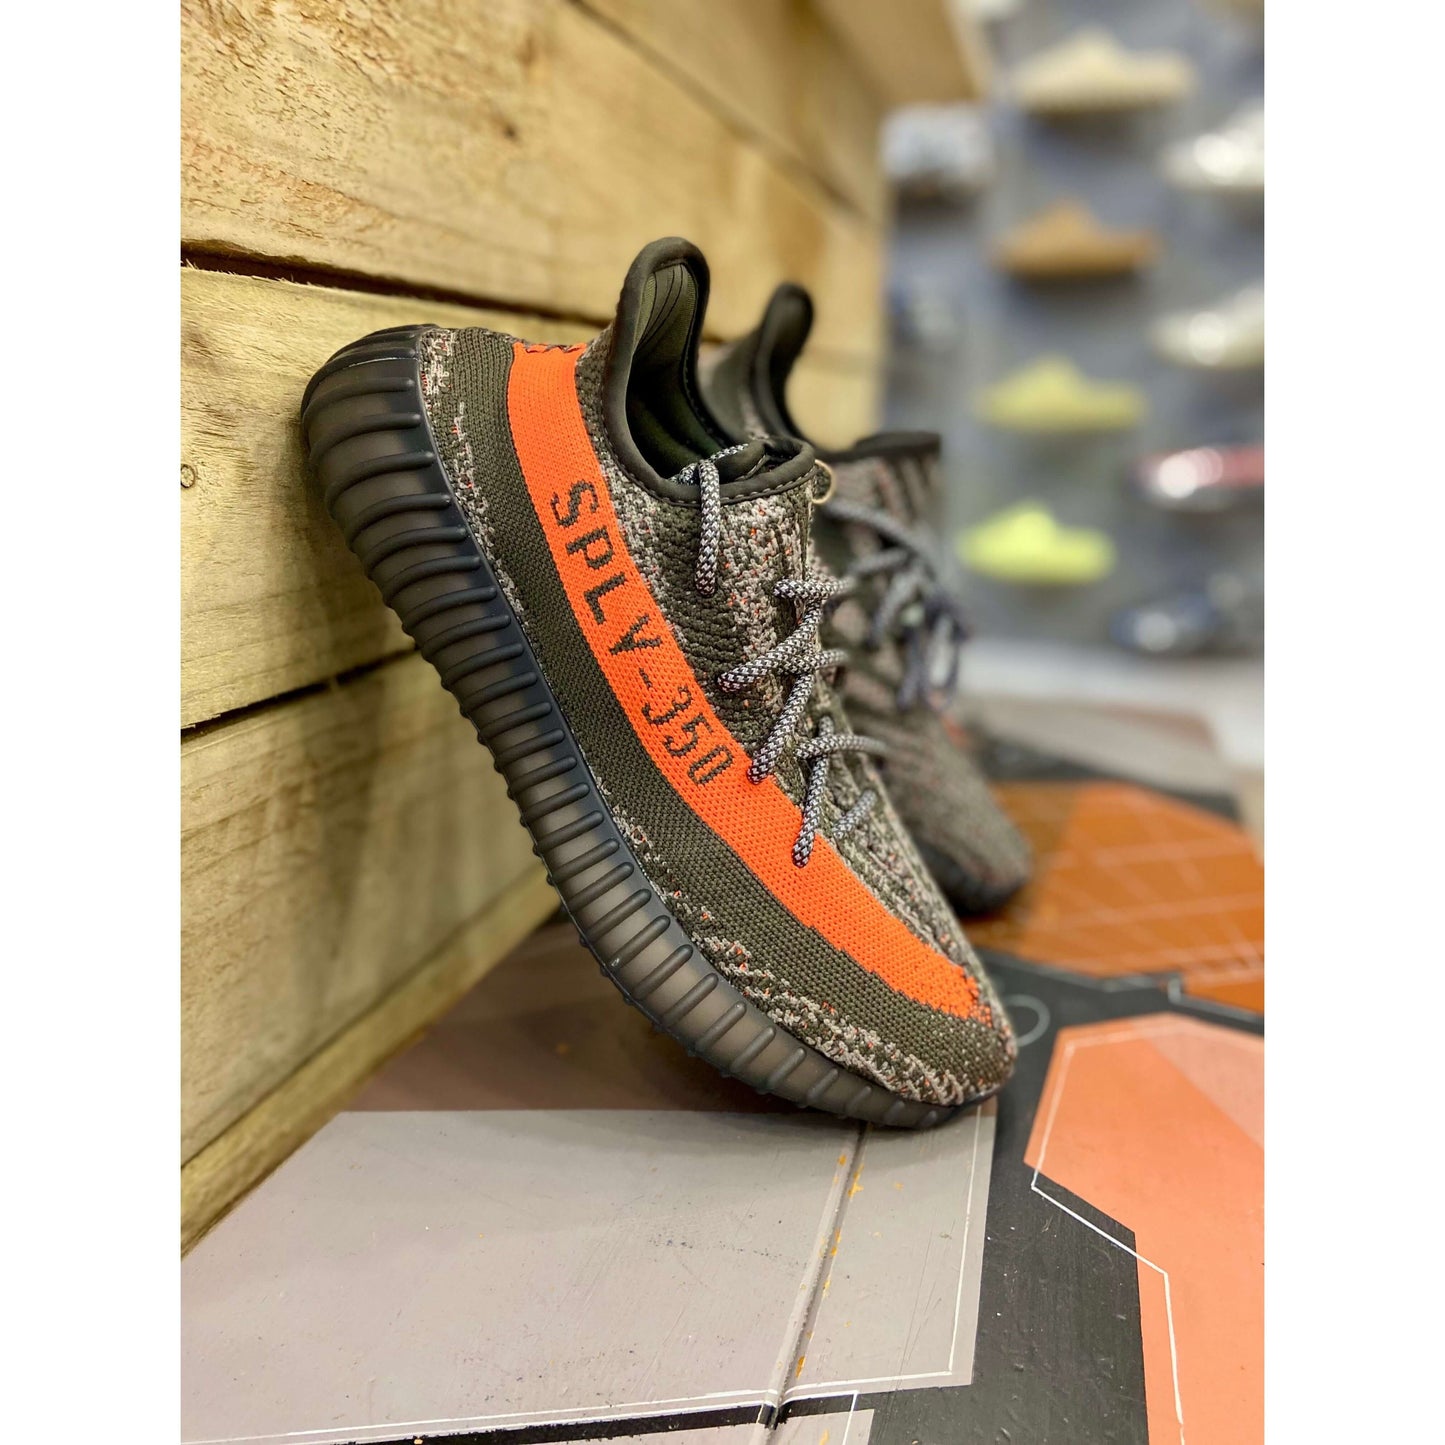 adidas Yeezy Boost 350 V2 Carbon Beluga by Yeezy from £248.00